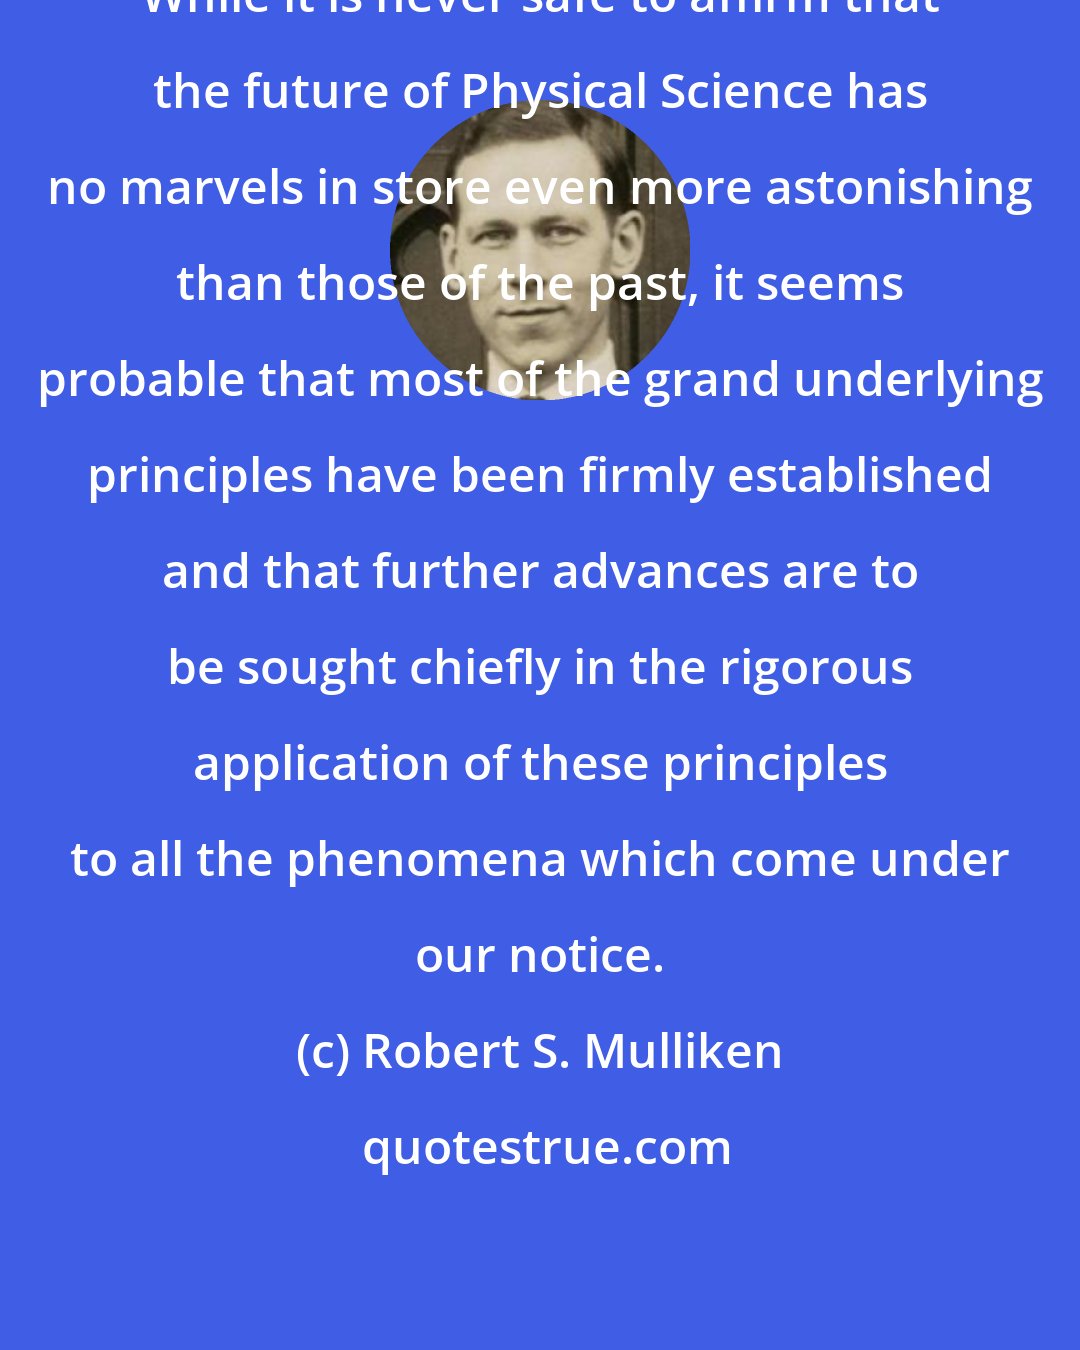 Robert S. Mulliken: While it is never safe to affirm that the future of Physical Science has no marvels in store even more astonishing than those of the past, it seems probable that most of the grand underlying principles have been firmly established and that further advances are to be sought chiefly in the rigorous application of these principles to all the phenomena which come under our notice.